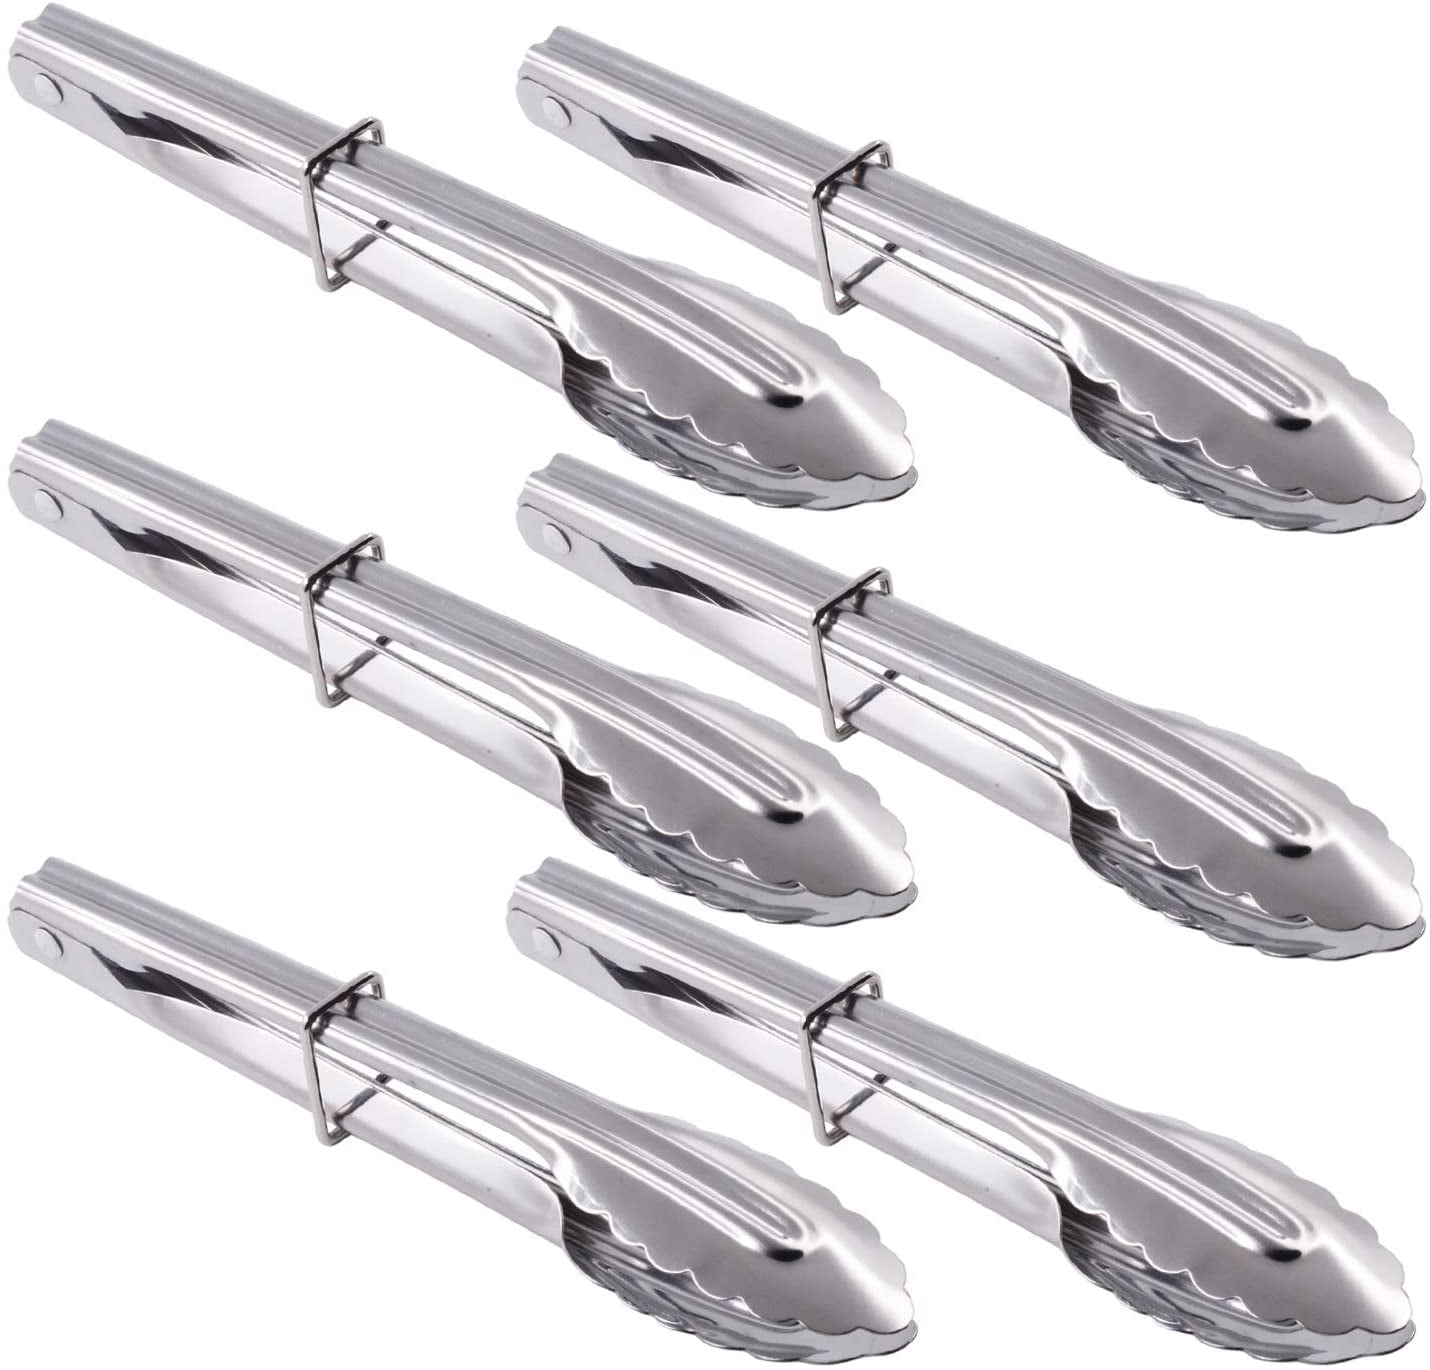 8 Pcs Ice Sugar Tongs, Stainless Steel Mini Serving Tongs Small